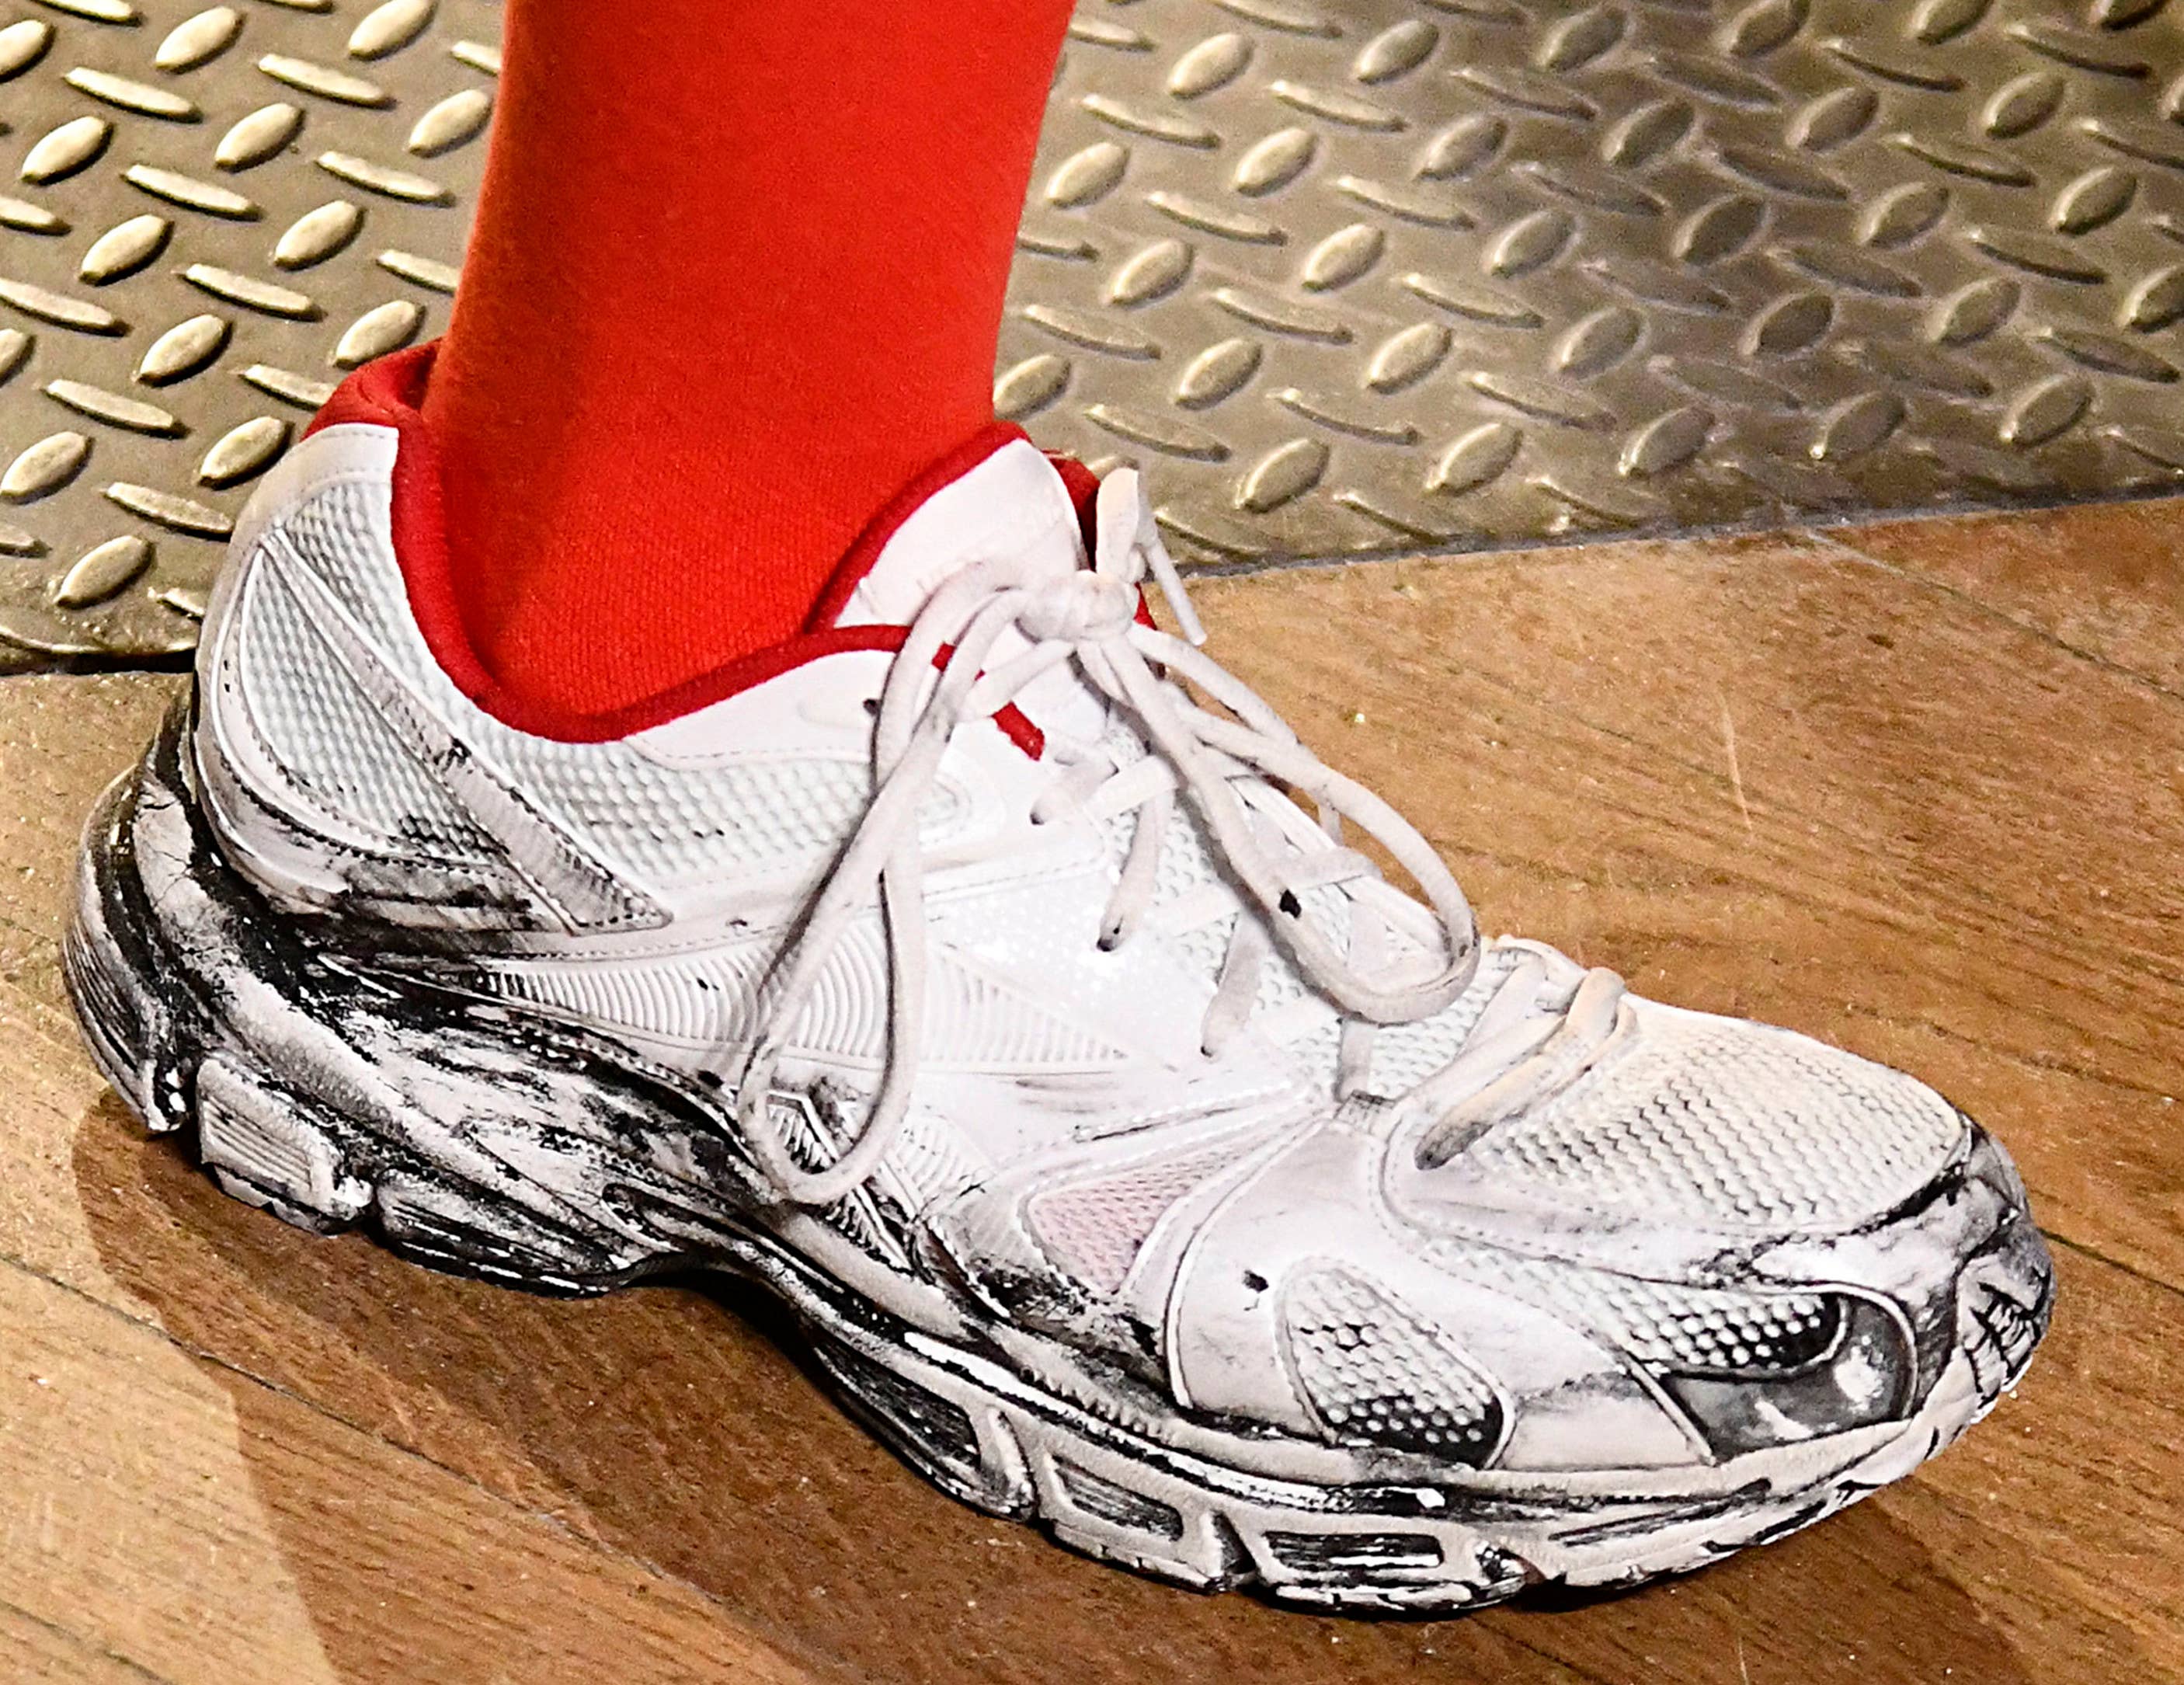 Reebok Is Releasing More Dirty Runners With Vetements